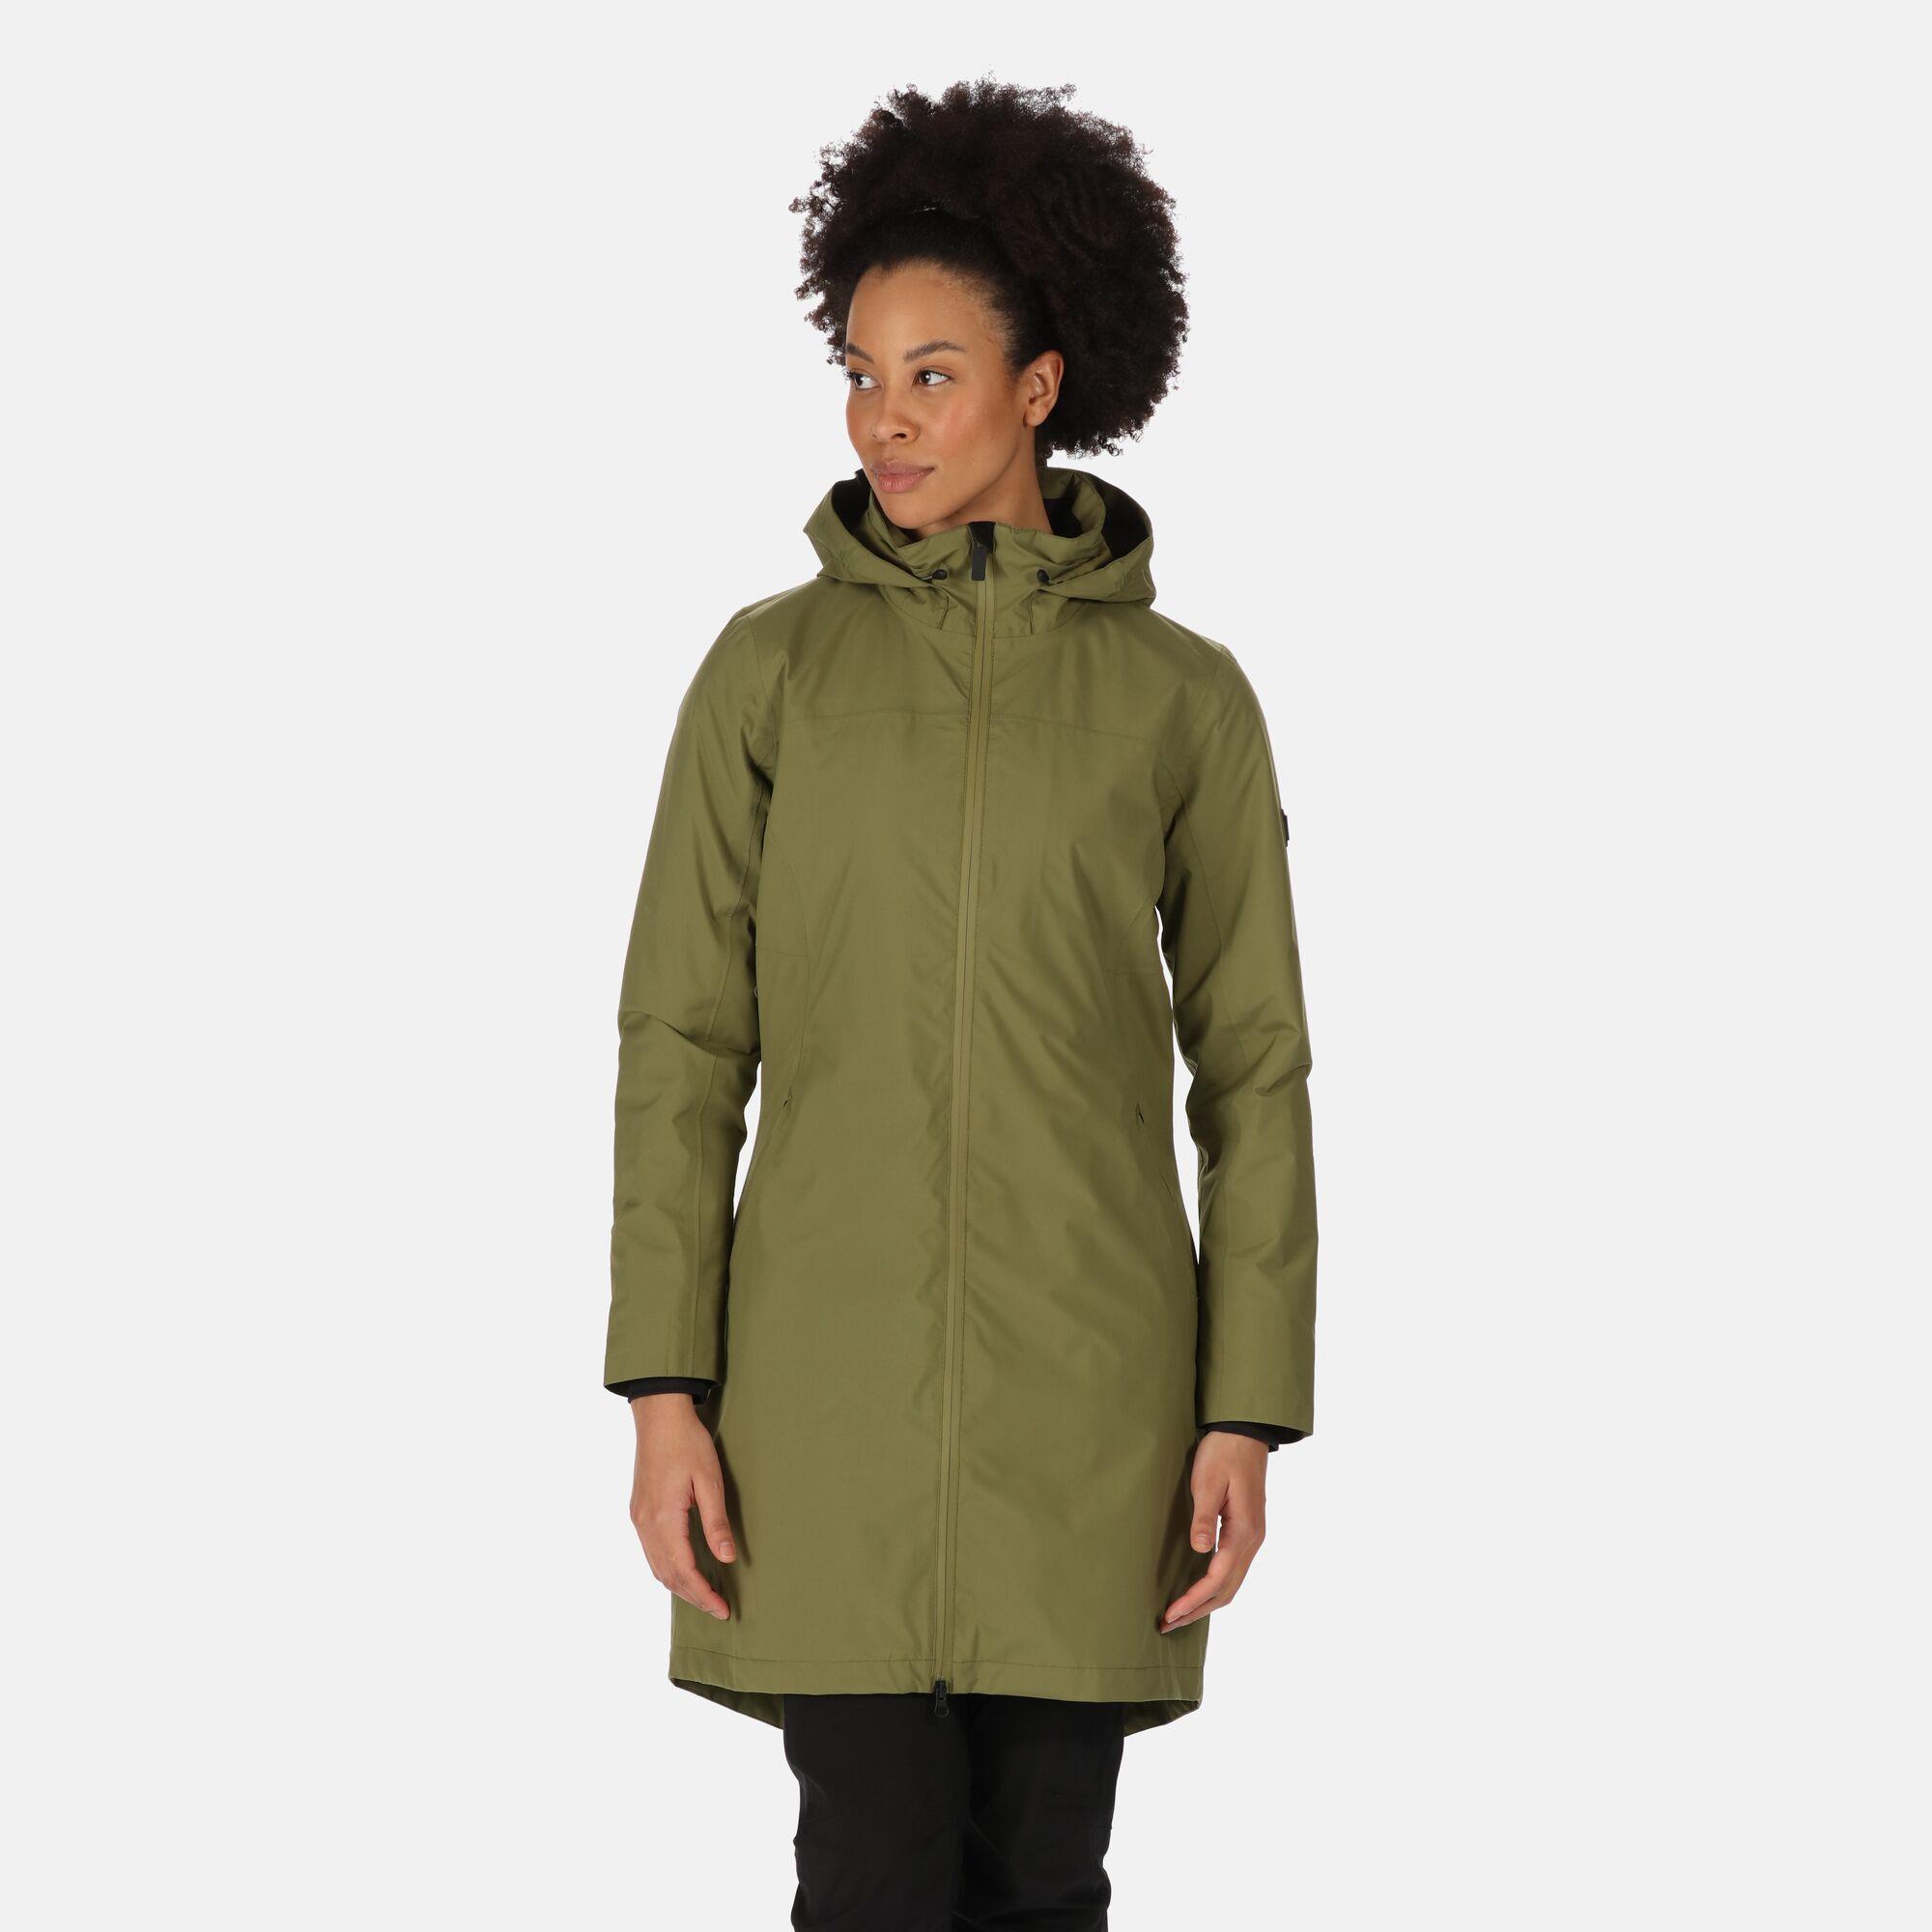 Regatta Womens Rulford Jacket Waterproof Breathable Parka Insulated ...